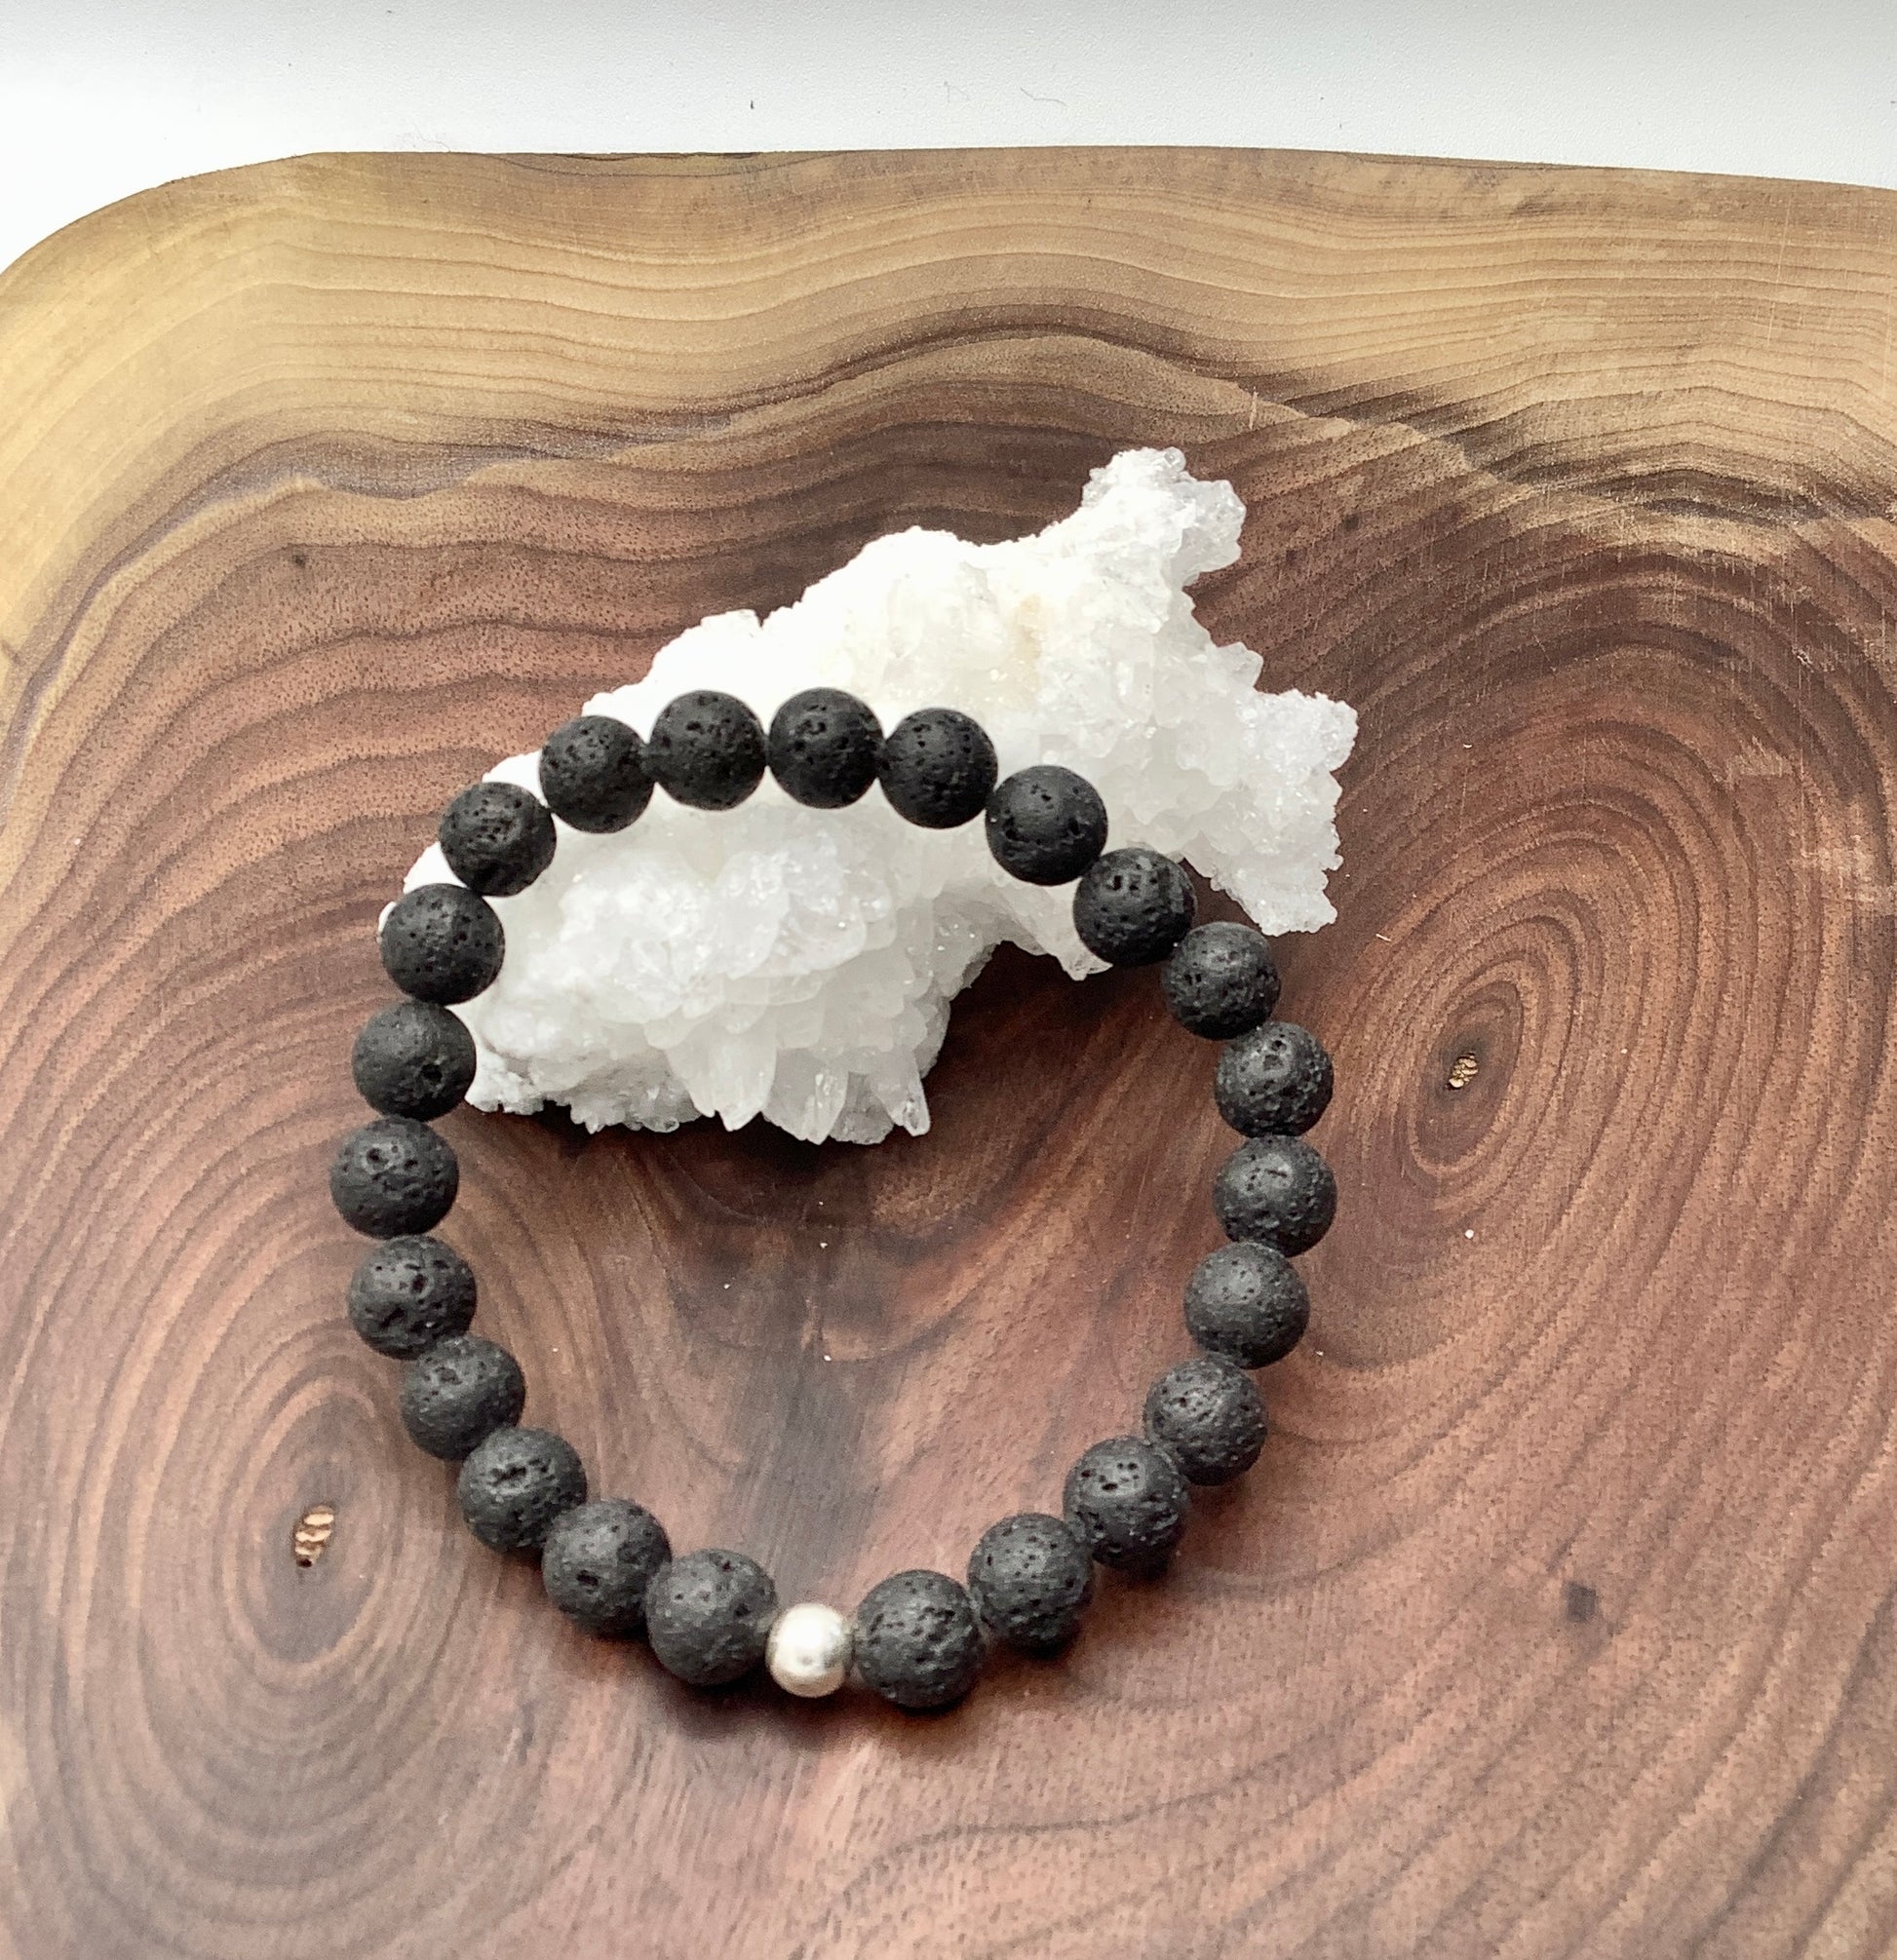 Lava Bead Bracelet with Sterling Silver Bead